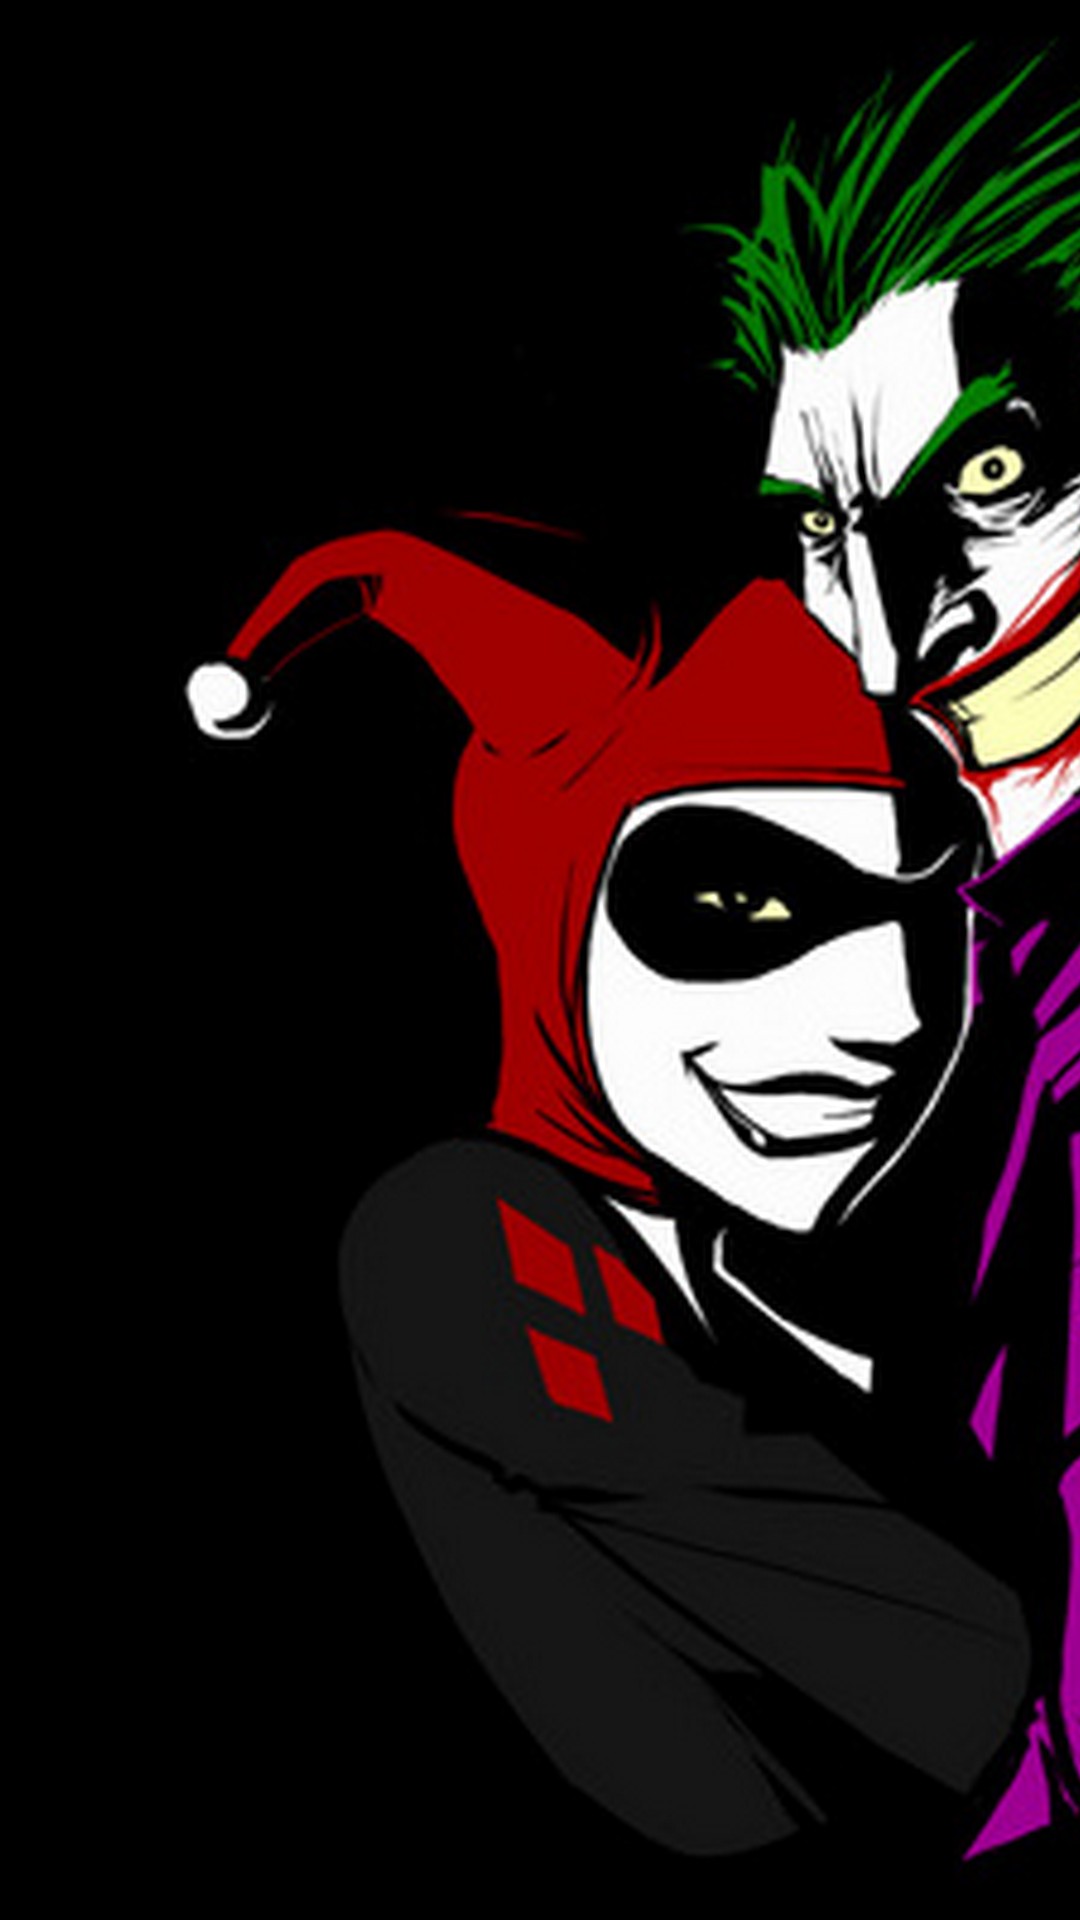 iPhone Wallpaper Joker And Harley with image resolution 1080x1920 pixel. You can make this wallpaper for your iPhone 5, 6, 7, 8, X backgrounds, Mobile Screensaver, or iPad Lock Screen